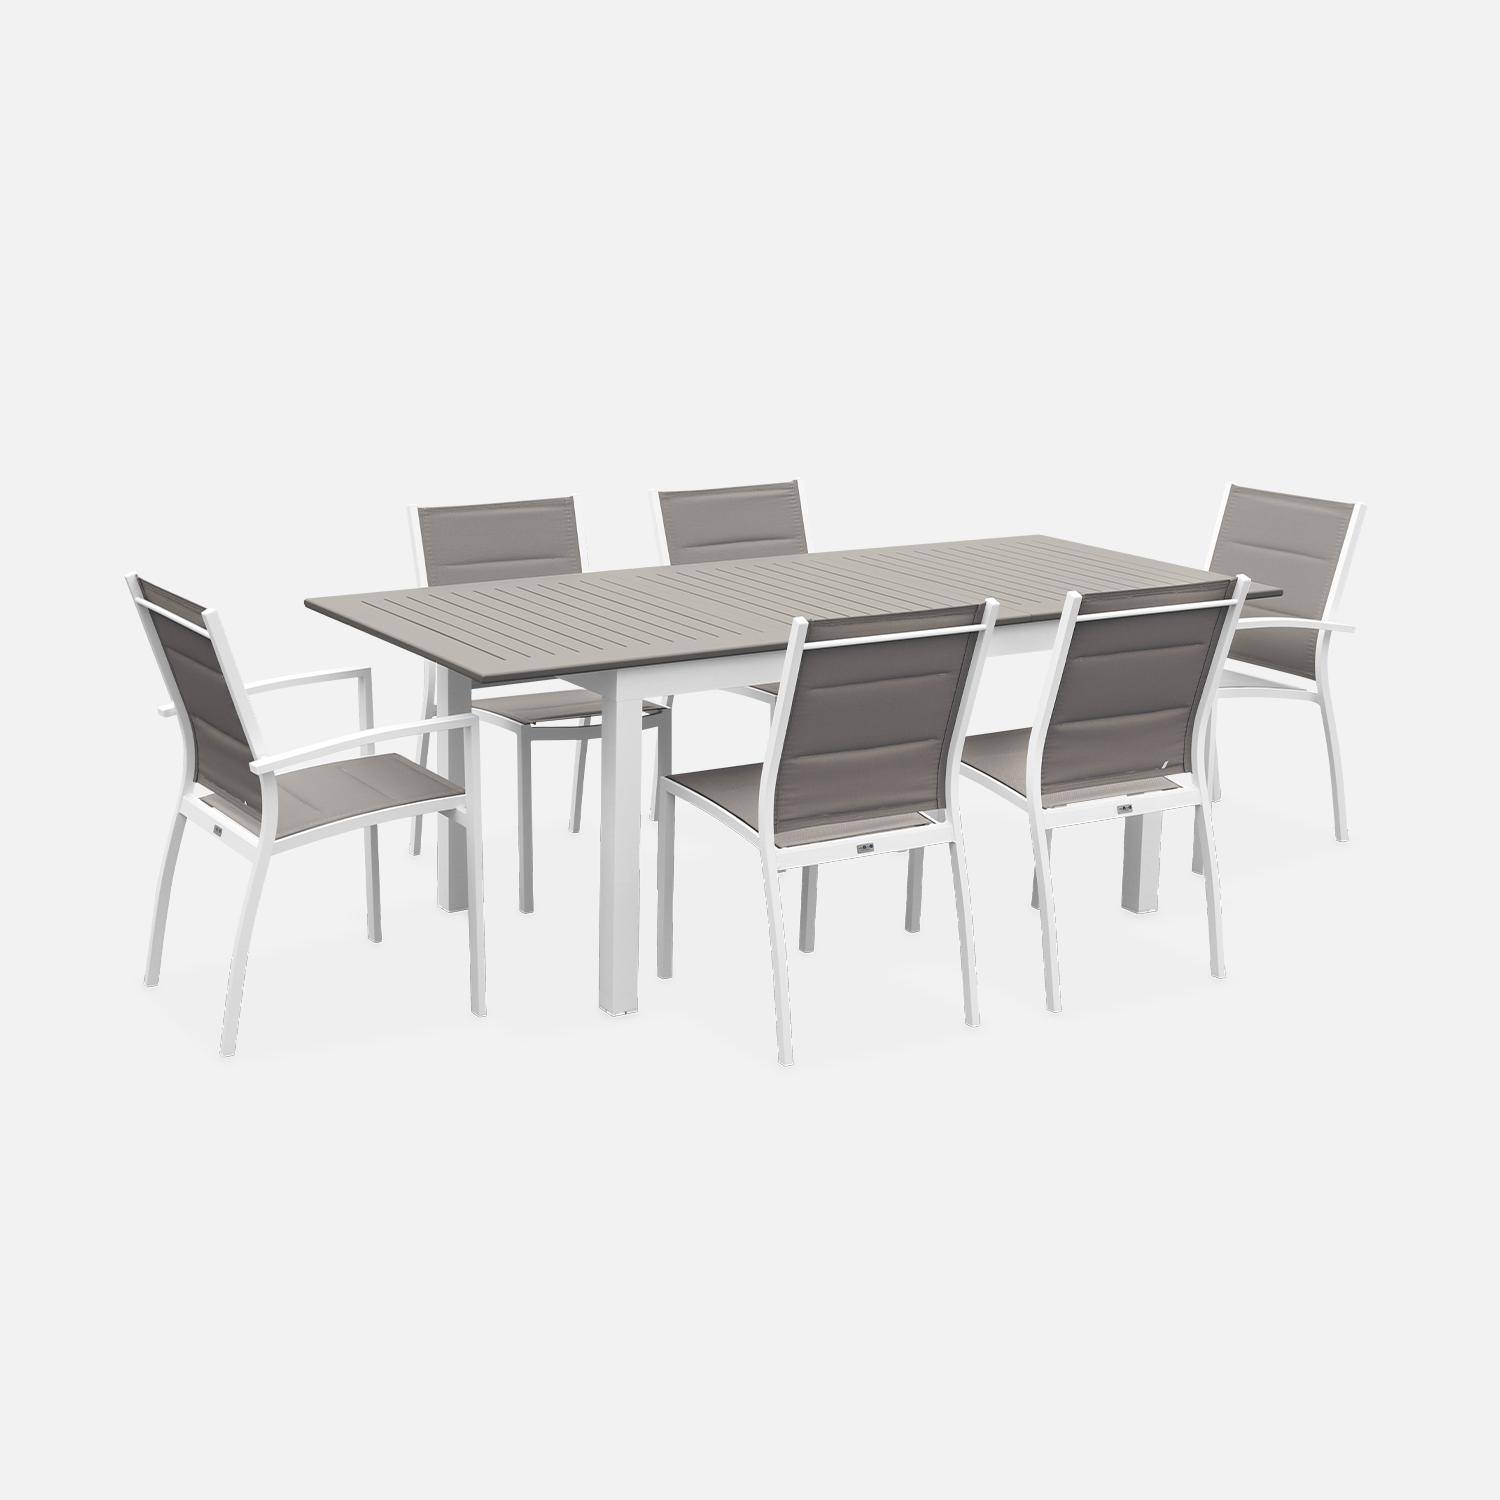 6-seater garden dining set, extendable 150-210cm aluminium table, 4 chairs and 2 armchairs - Chicago 6 - White frame, Beige-Brown textilene Photo2